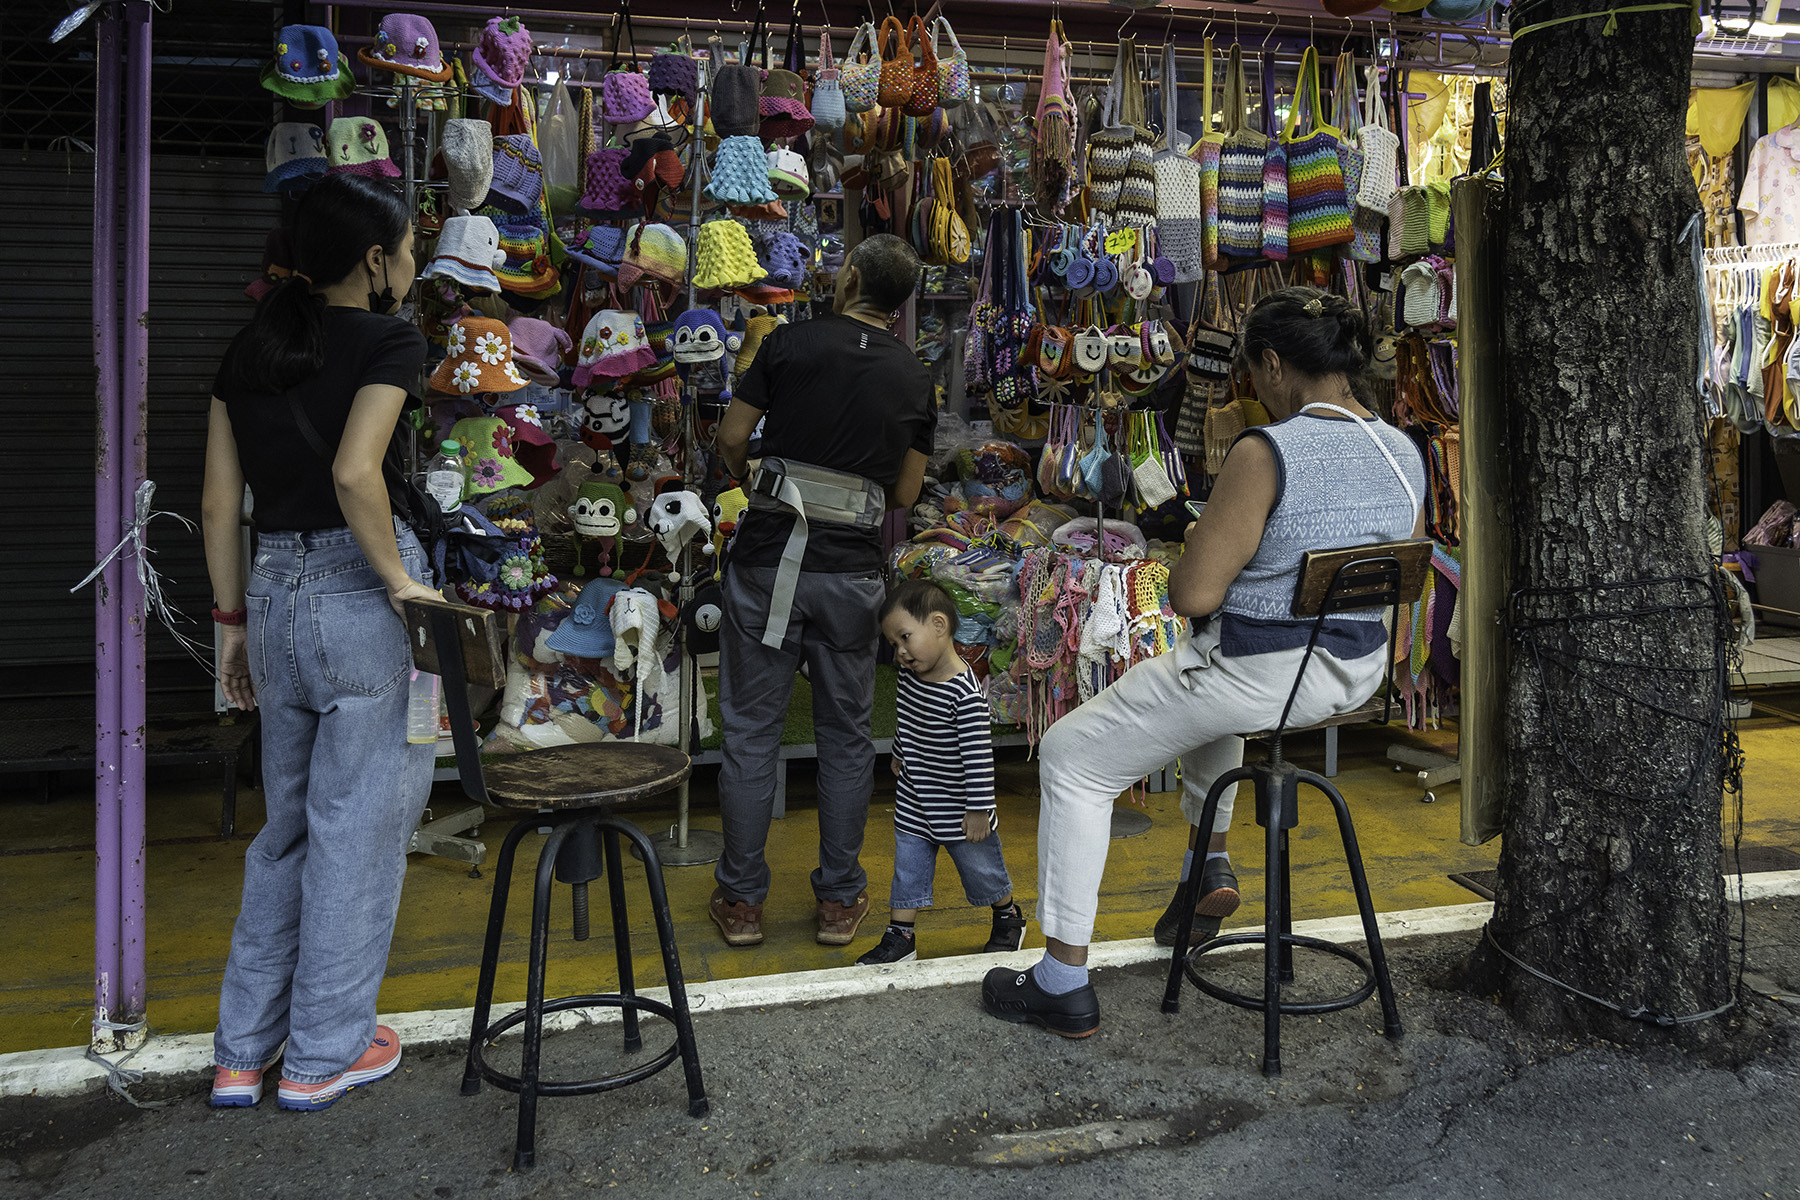 A vender sits at his stall with a child and a woman standing nearby at Chatuchak Weekend Market